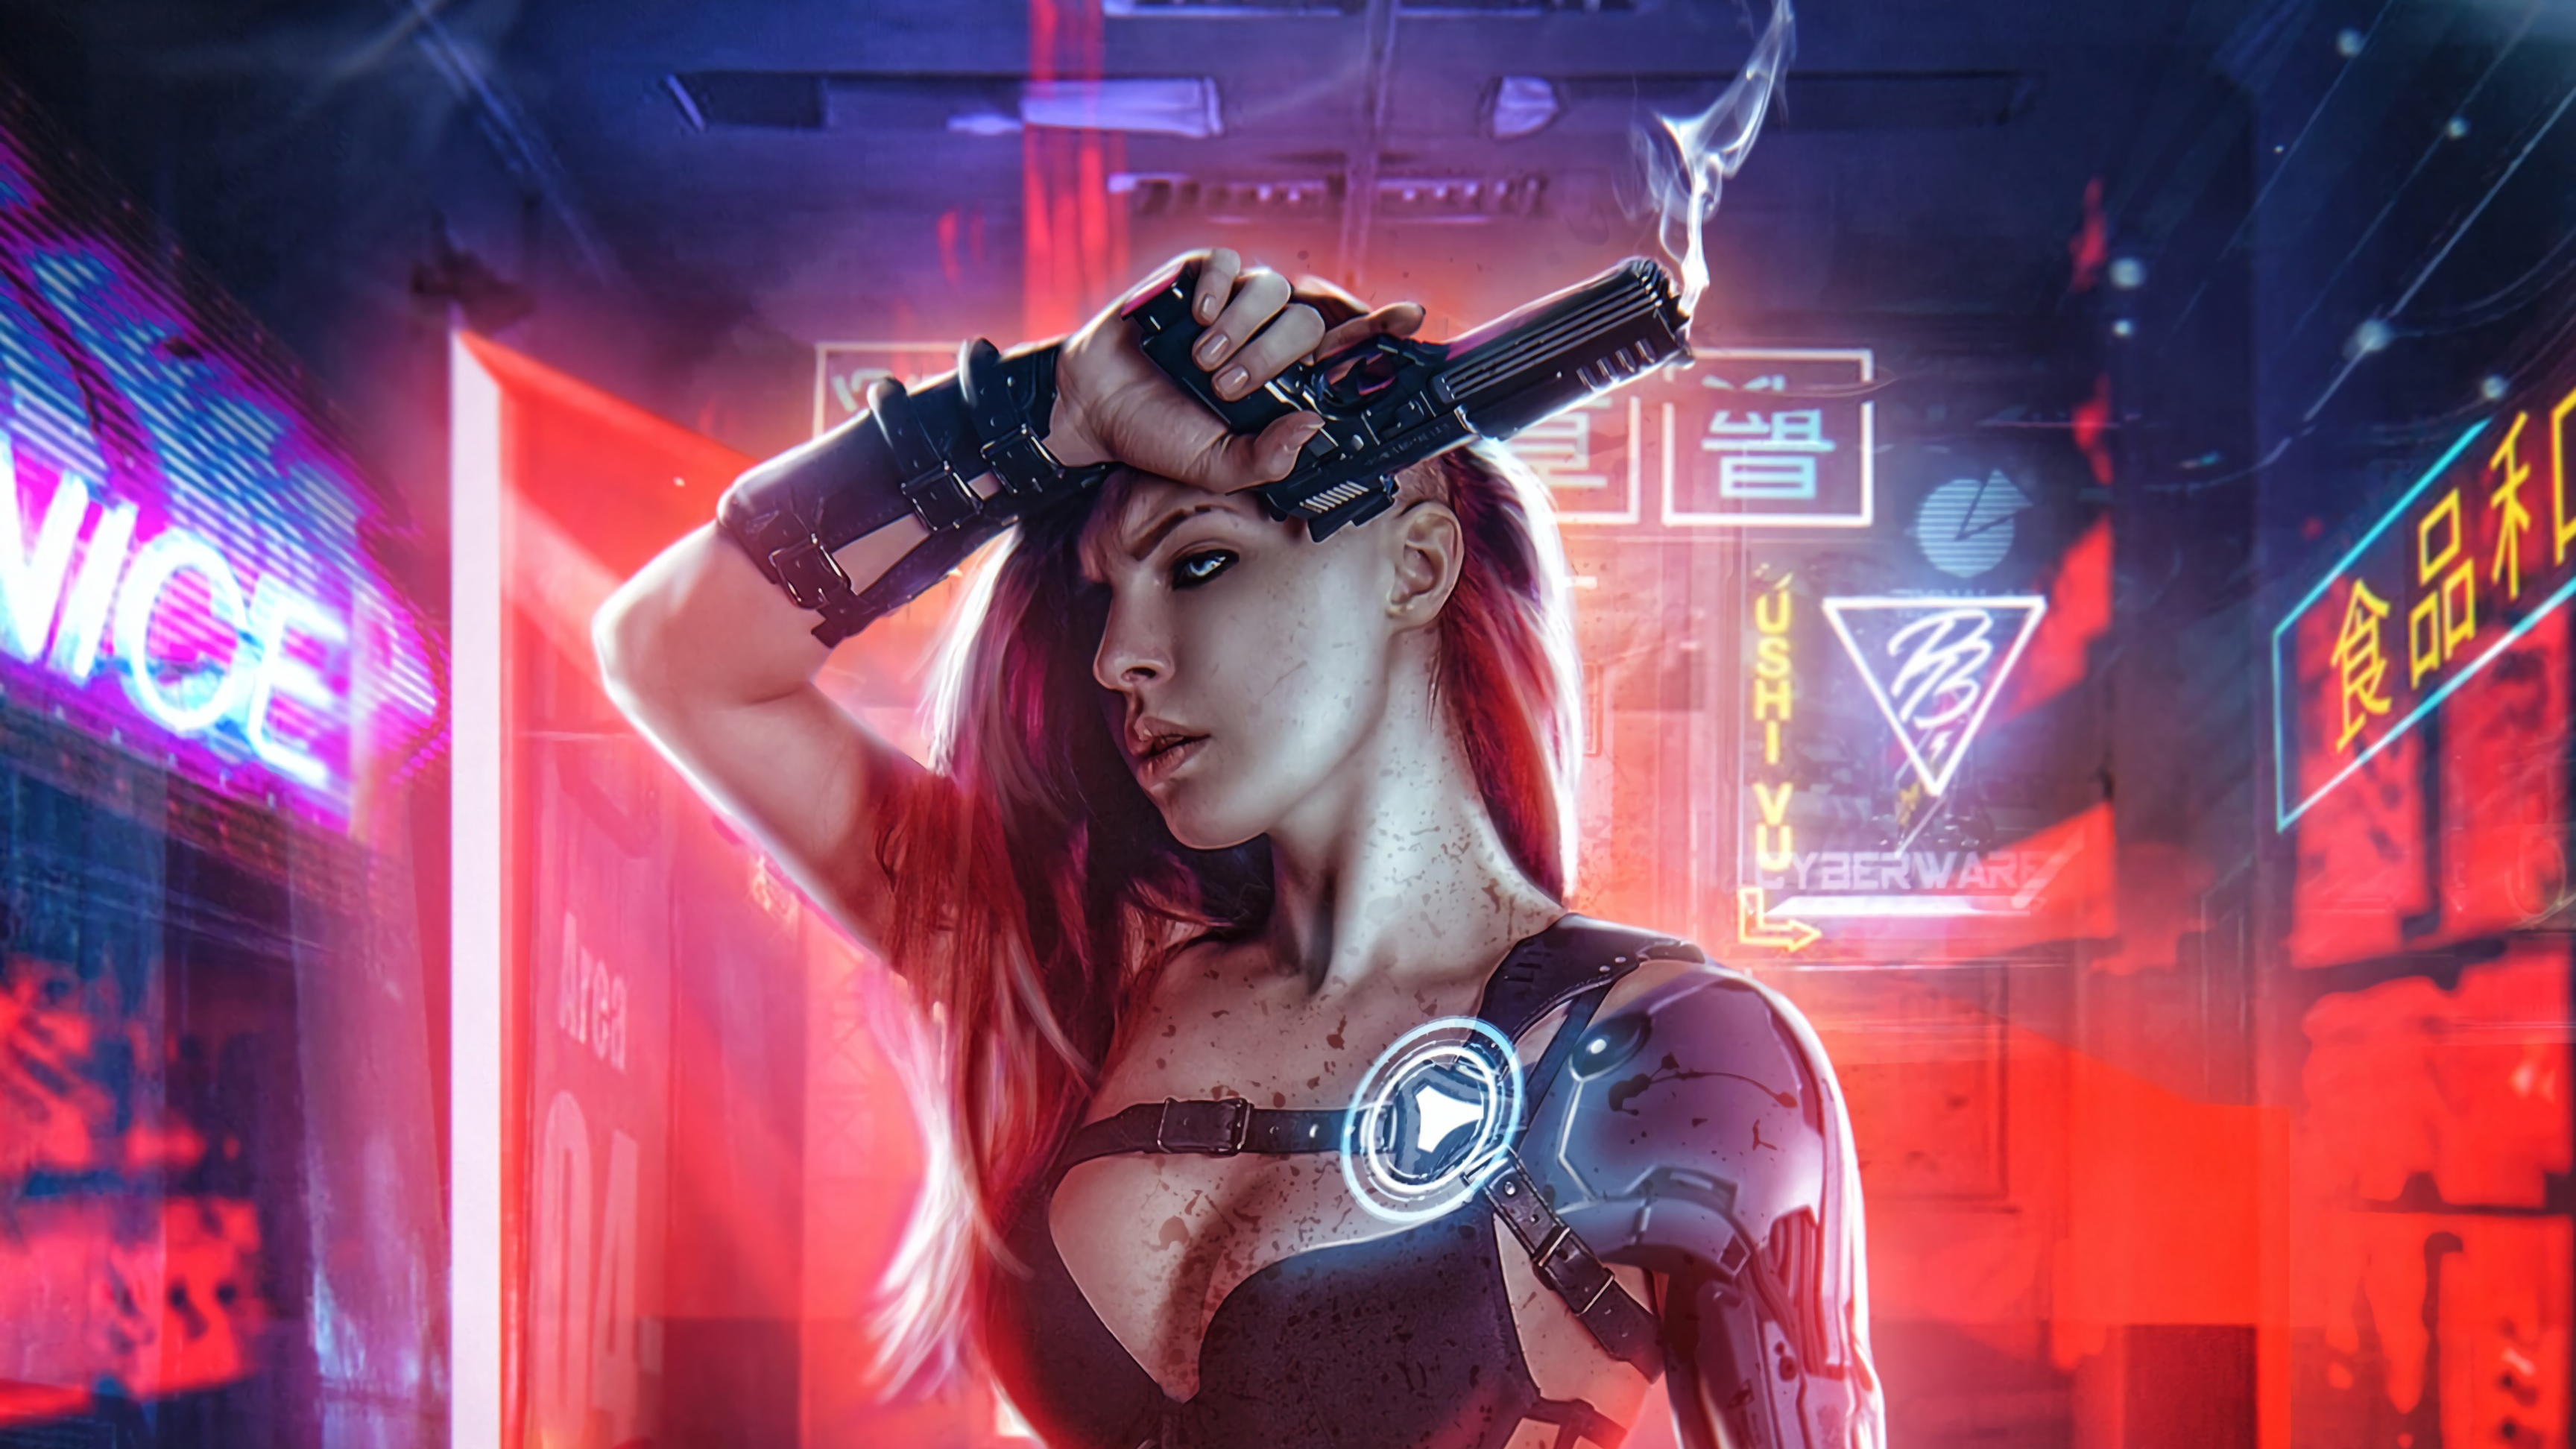 Cyberpunk Girl With Gun 4k Hd Artist 4k Wallpapers Images Backgrounds Photos And Pictures 0499